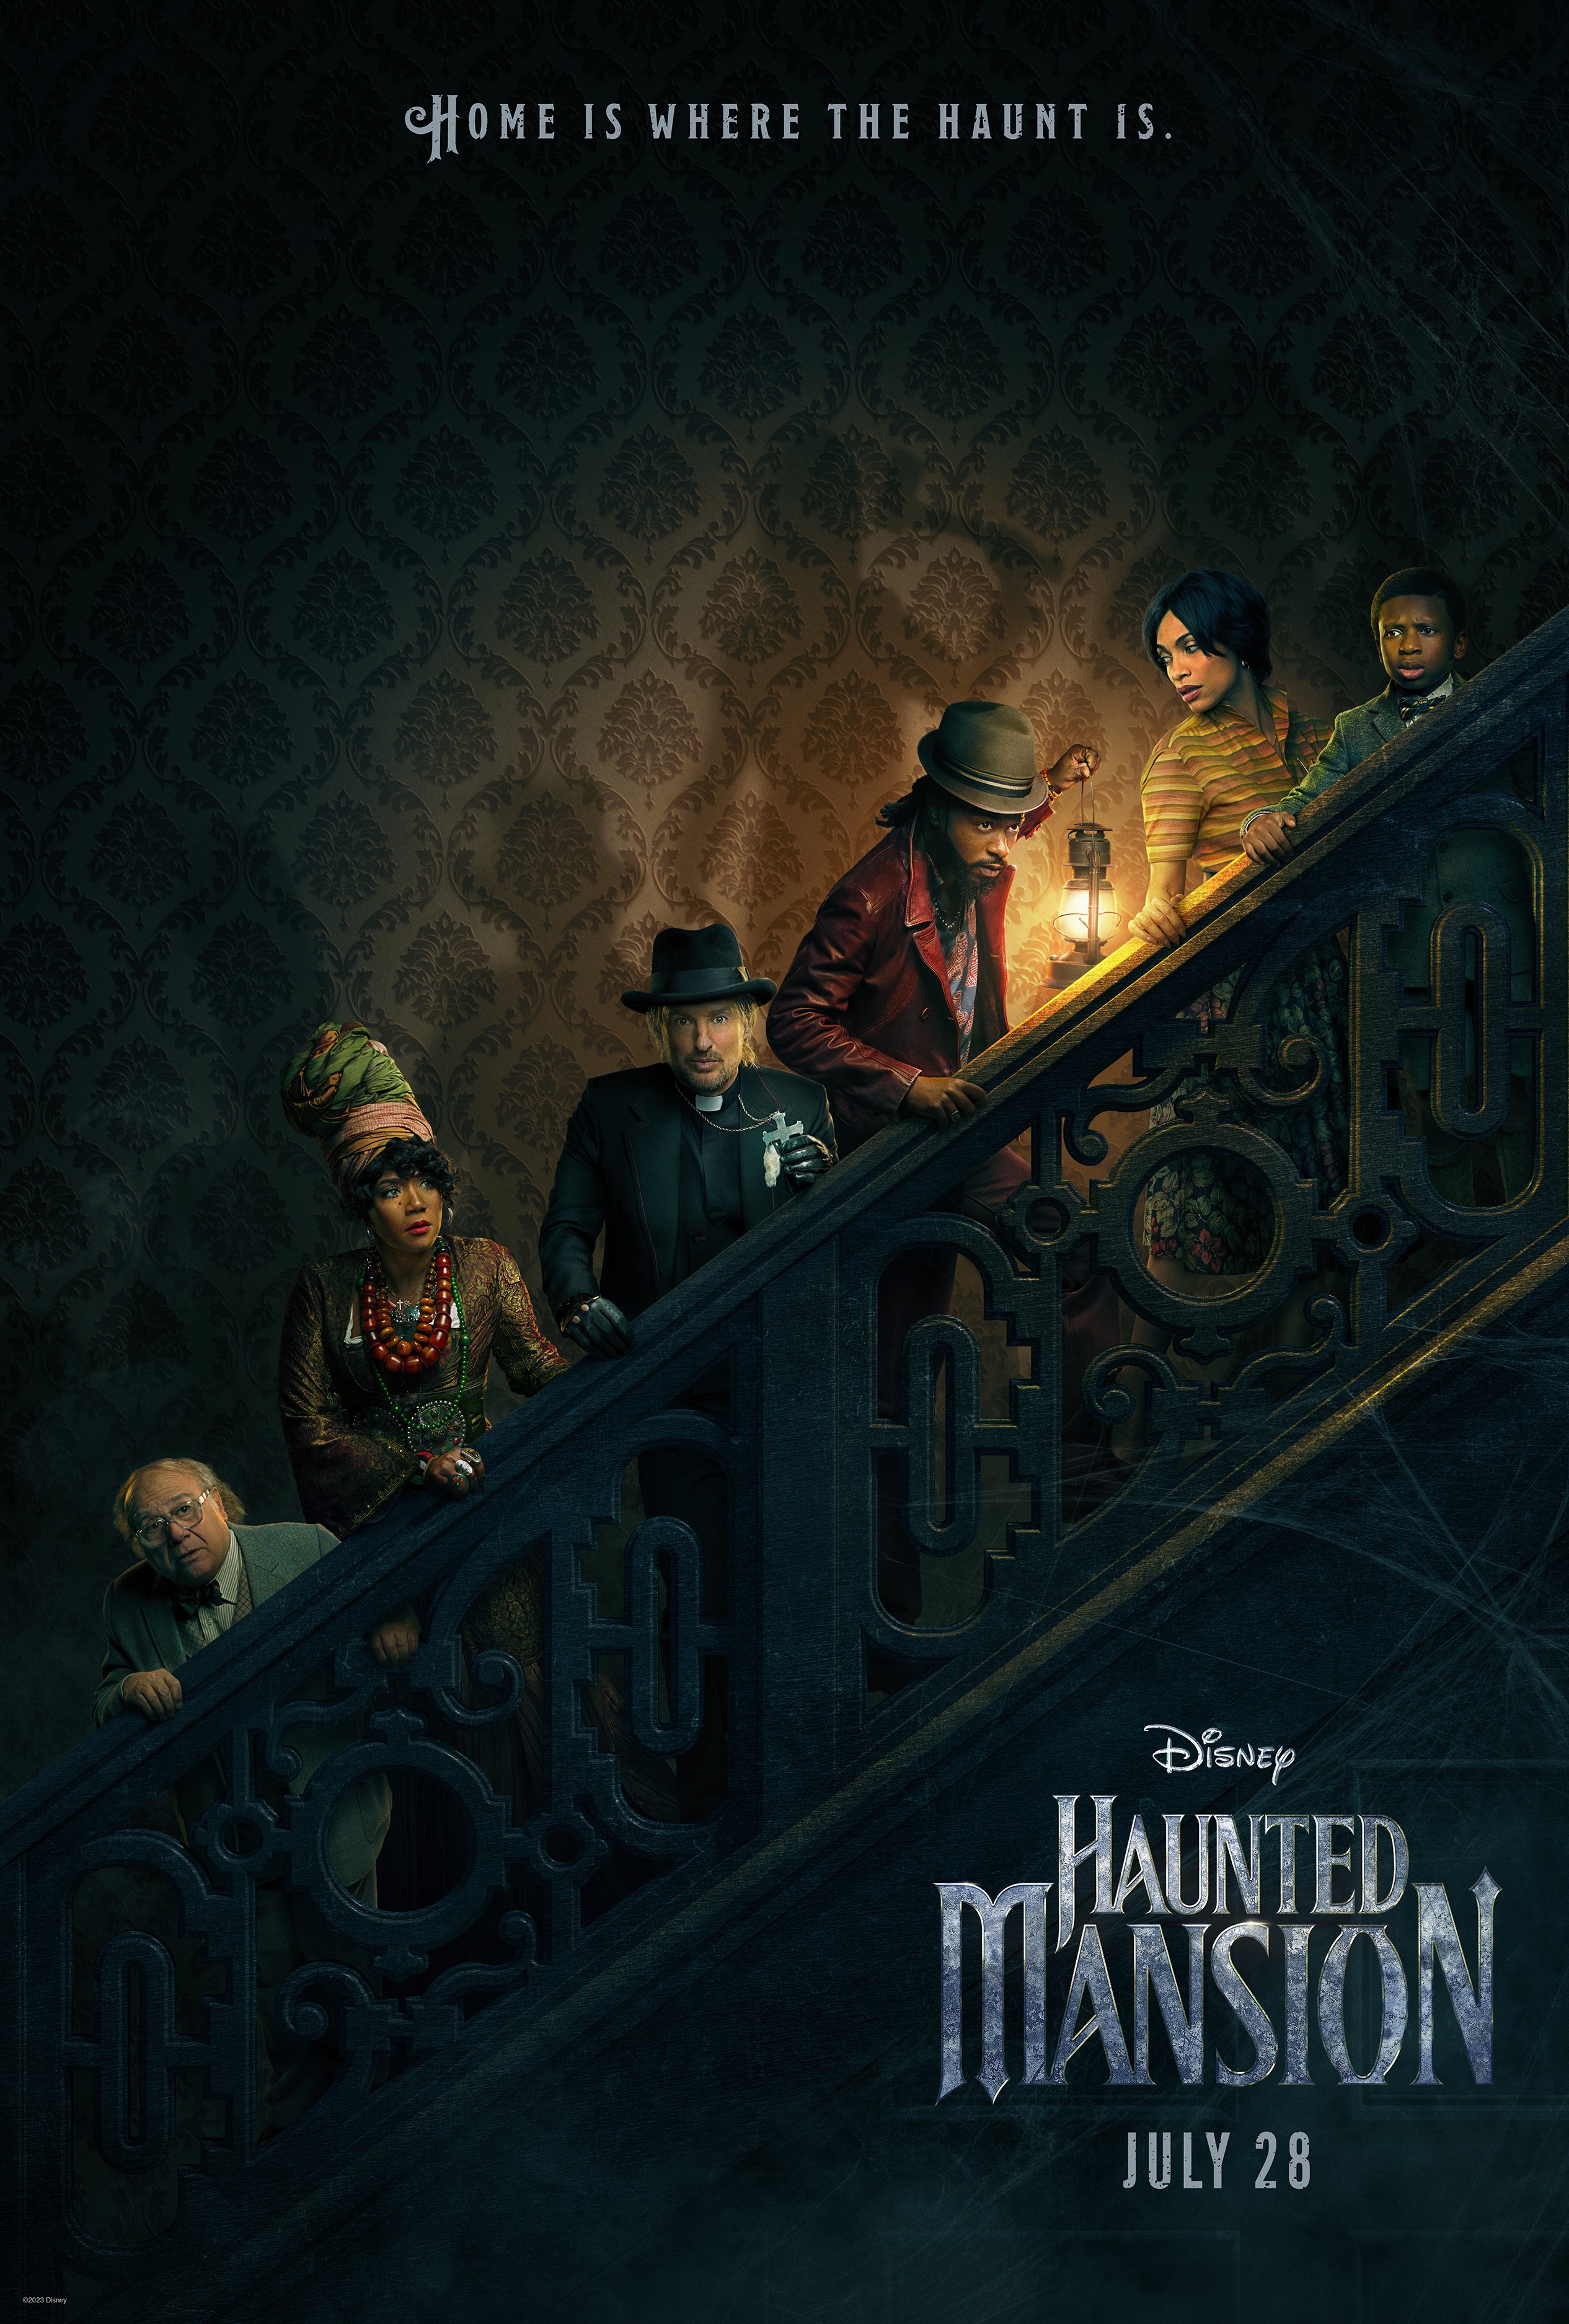 Haunted Mansion Teaser Trailer Trailers & Videos Rotten Tomatoes